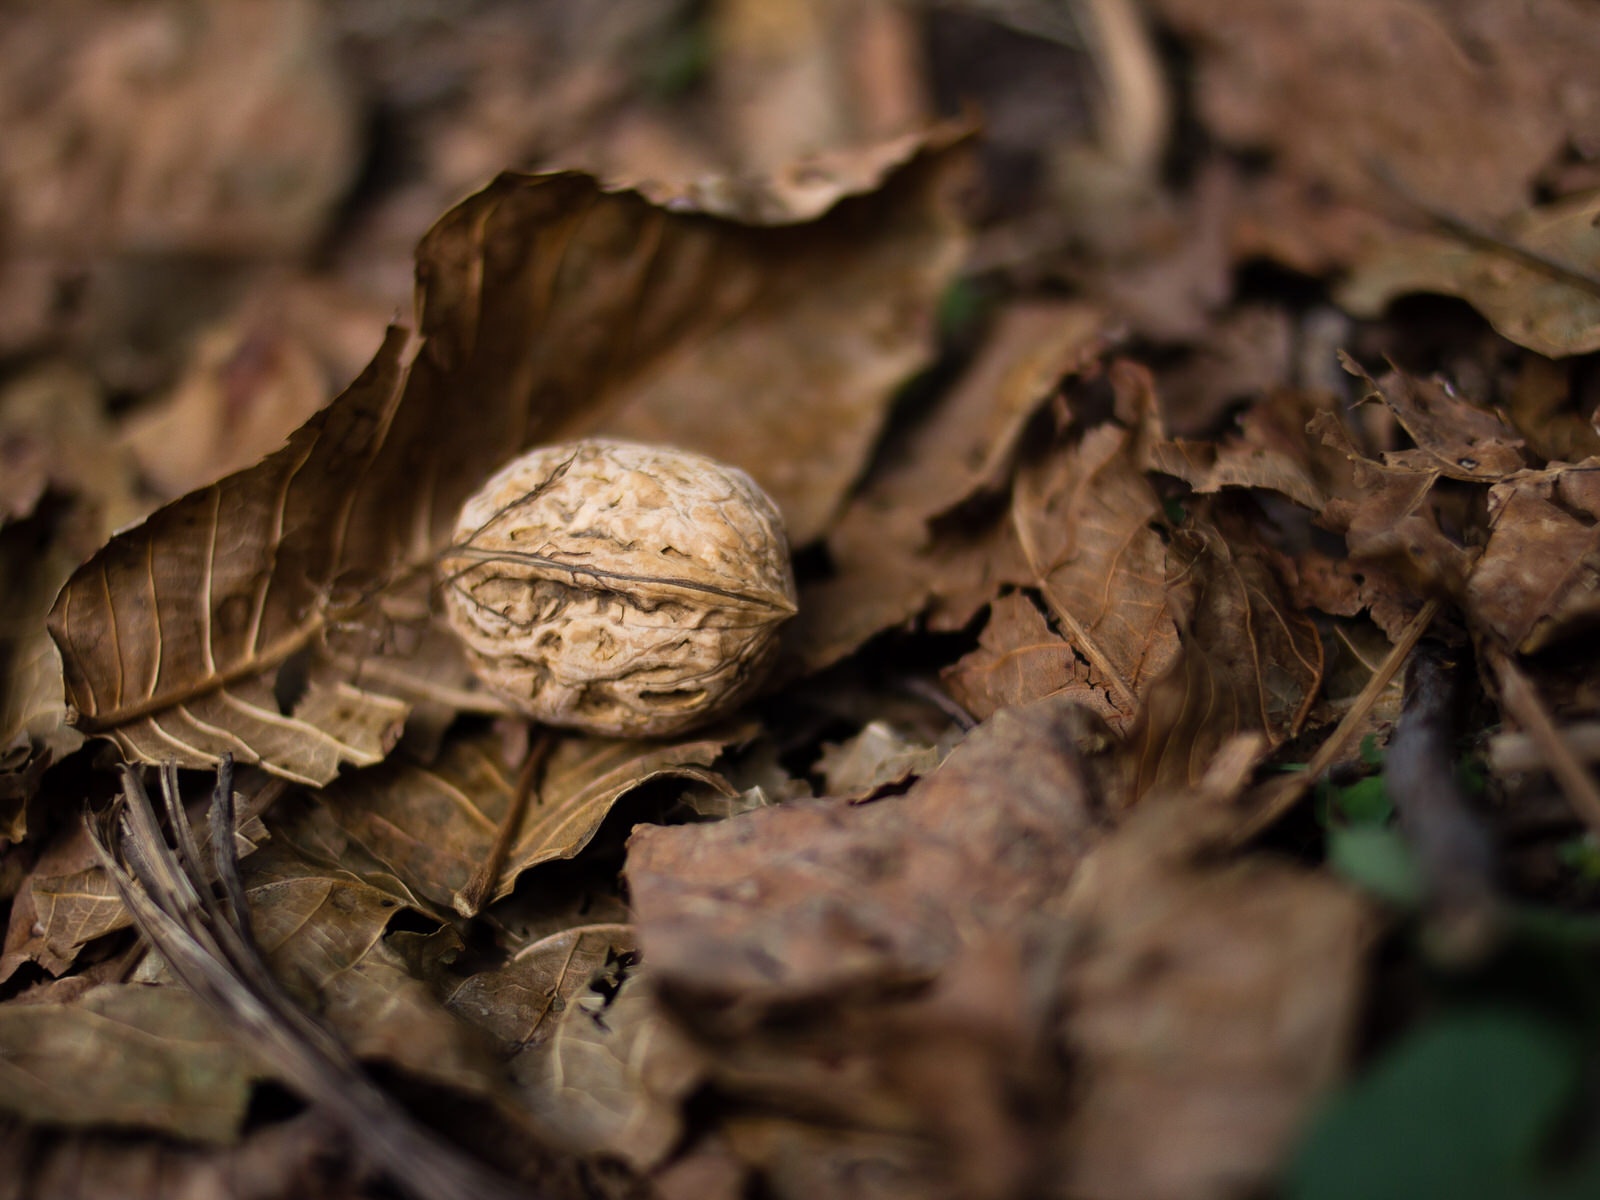 An unshelled walnut sitting on brown leaves on the forest floor © Stephen Lioy / Lonely Planet